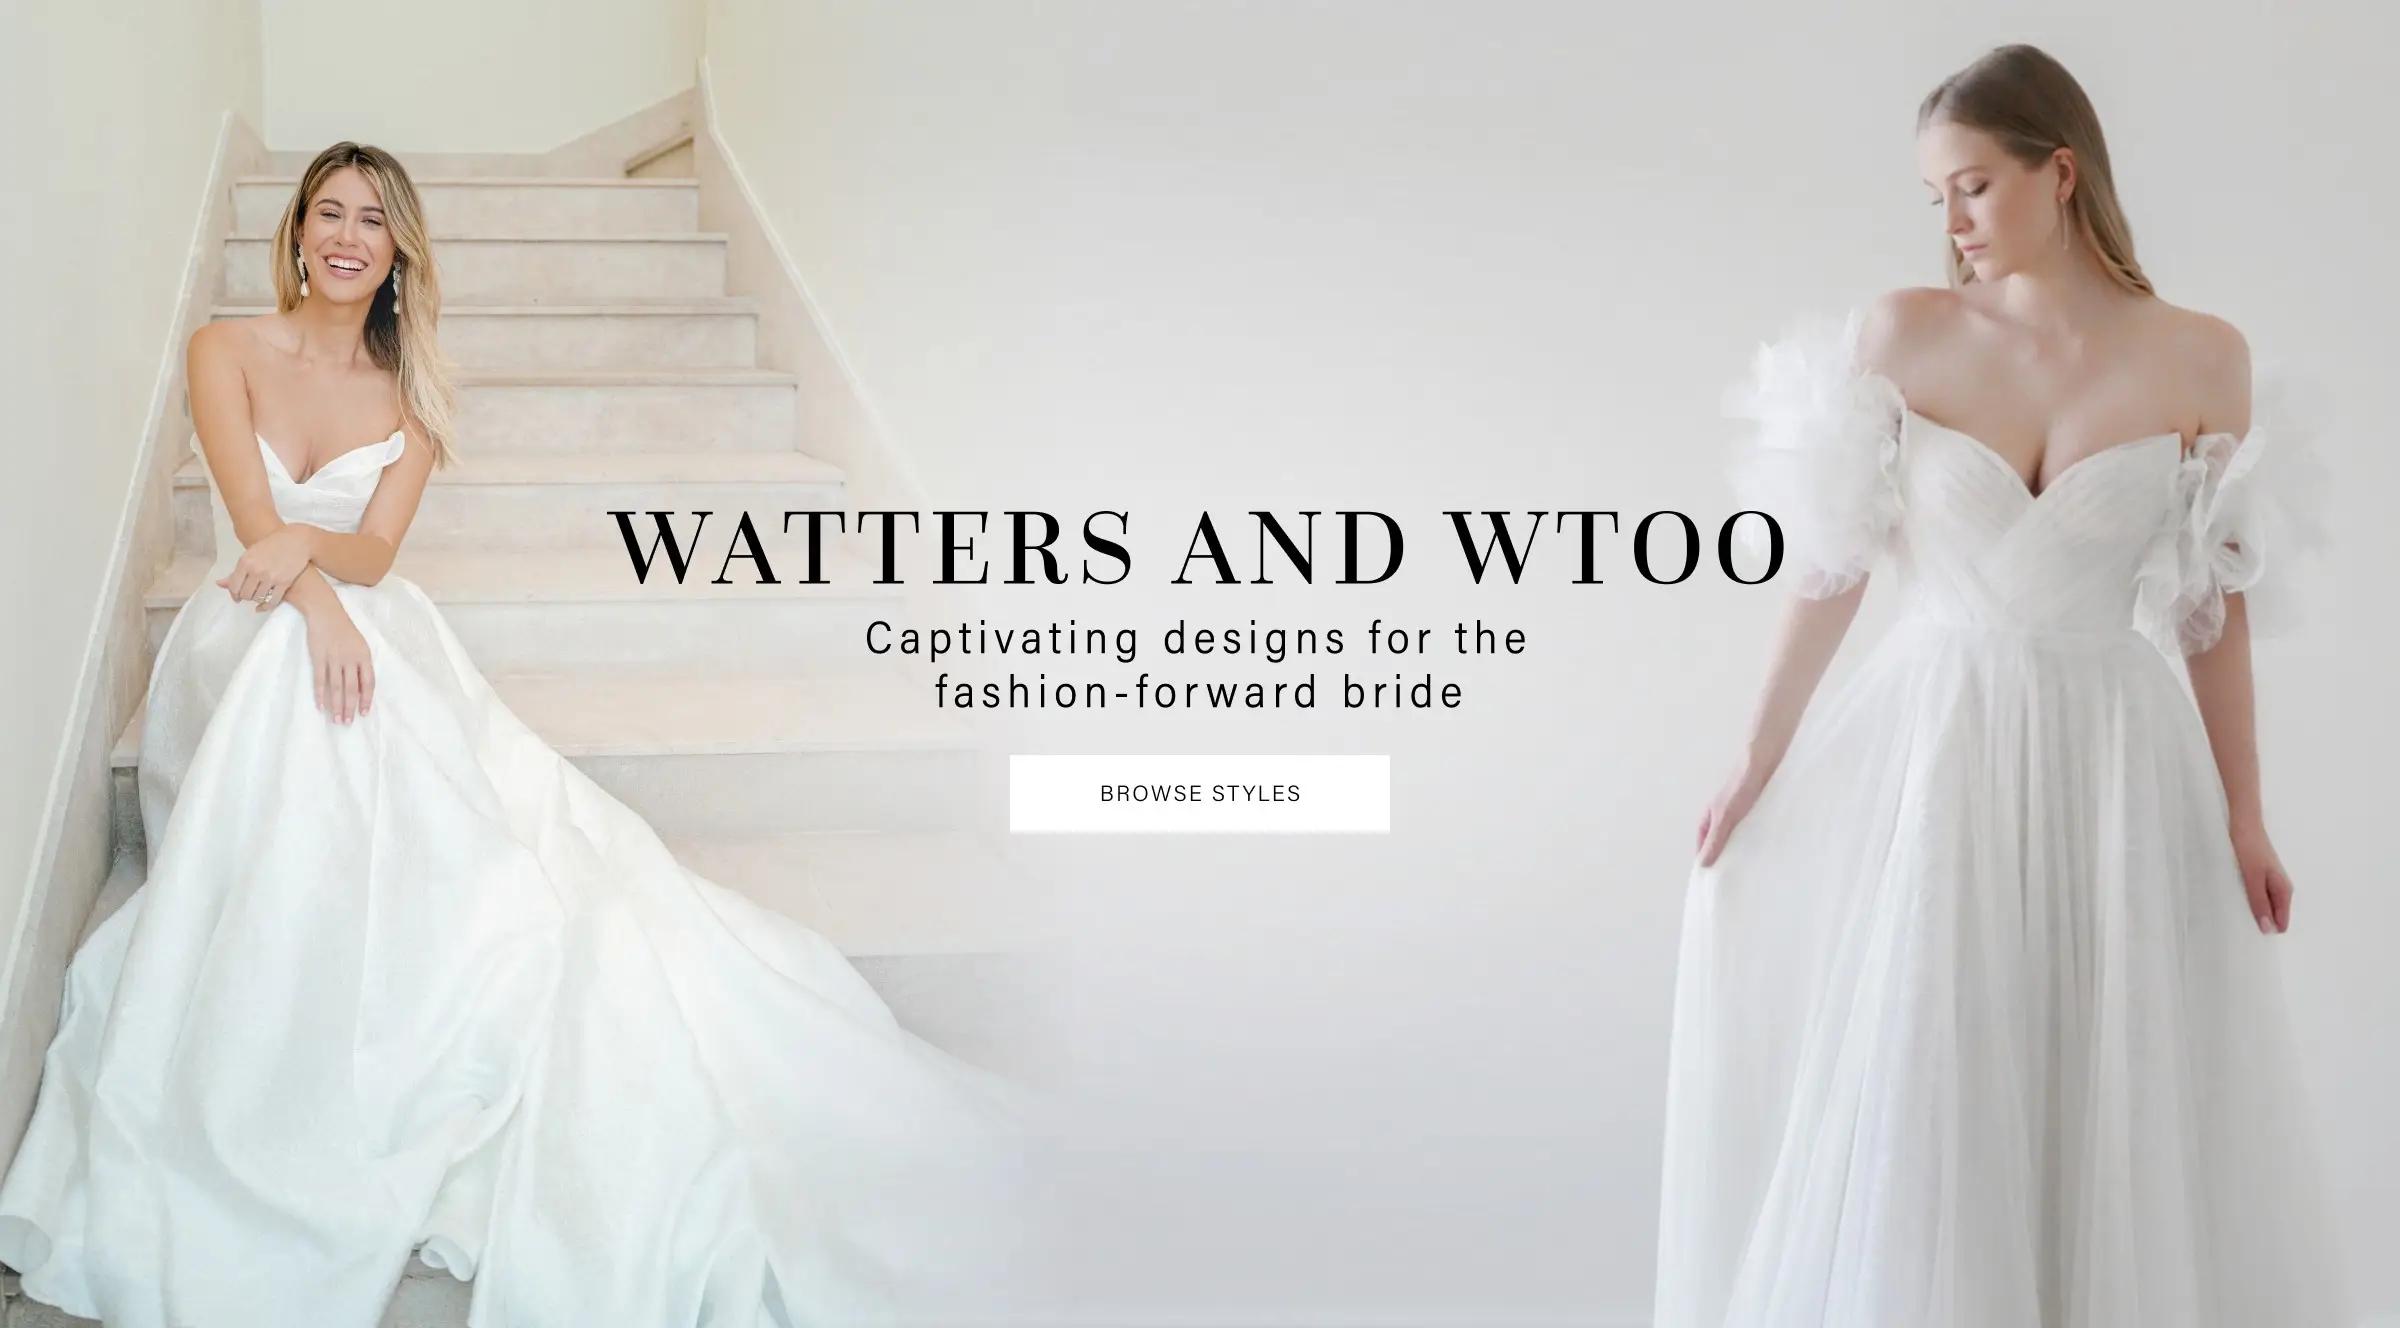 Watters and Wtoo Wedding Dresses at Signature Bridal Salon in Austin, TX